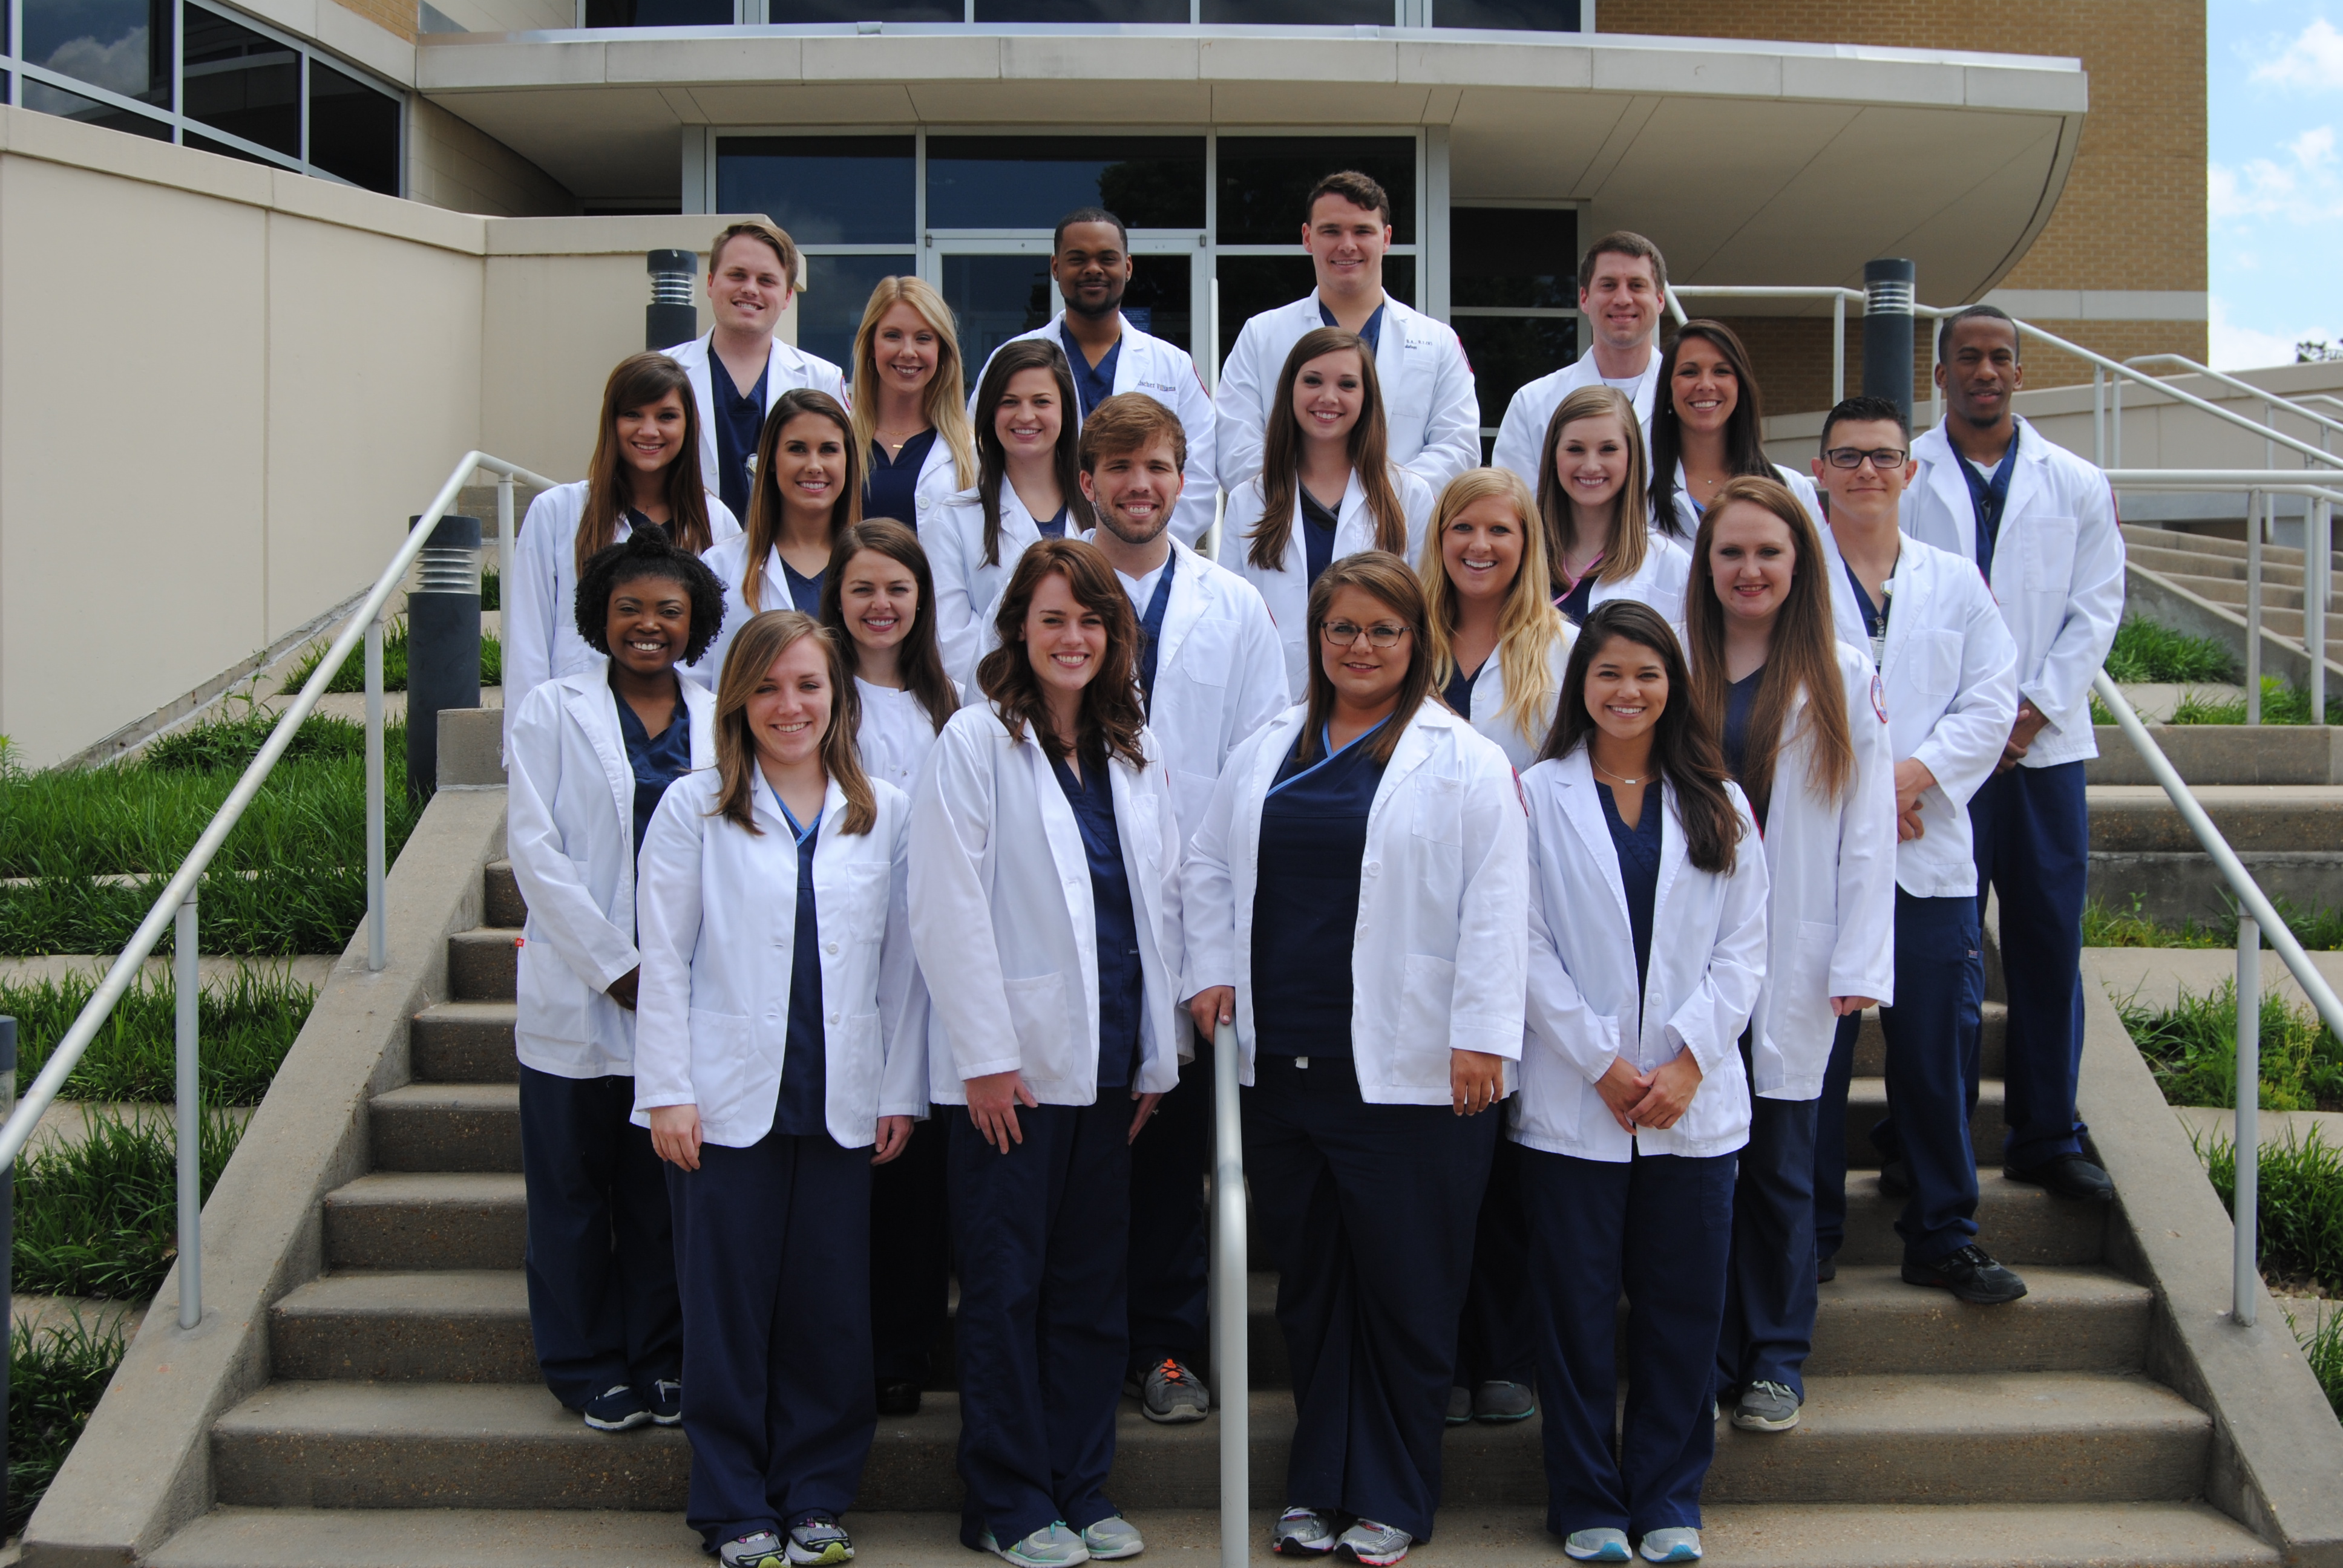 Radiologic sciences graduates who achieved a perfect pass rate include, front row from left, Anne Howard Steinwinder, Shelby Erickson, Alison Sullivan and Liana Wooley; second row from left, Taylor Shumpert, Alexa Graham, Tyler Johnson, Hanna Kemp and Alex Noah; third row from left, Mary Hooper Mason, Kala Ford, Anna Crawford, Savannah Gillis, Kimberly Tolliver, Leah Santucci, Anthony Chirinos and Jeremy Williams; and back row from left, Brooks Jackson, Victoria Hardwick, Rischer Williams, Tyler Gray and Tyler Burnett.